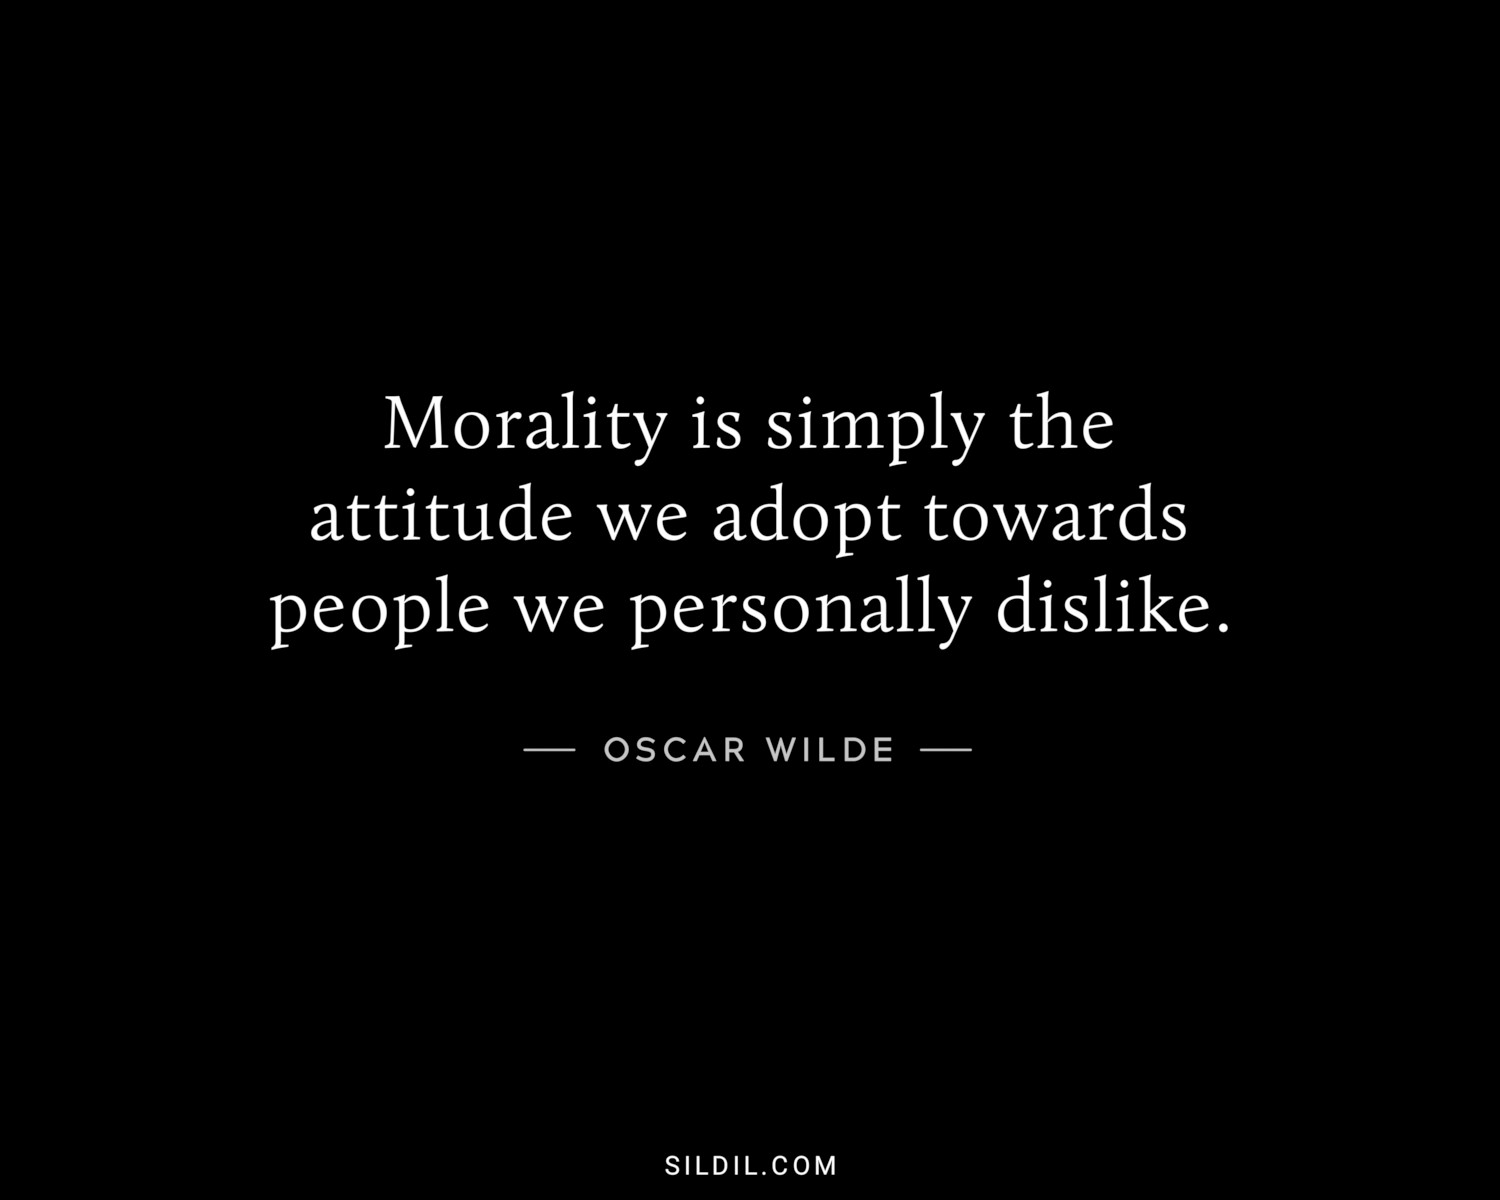 Morality is simply the attitude we adopt towards people we personally dislike.